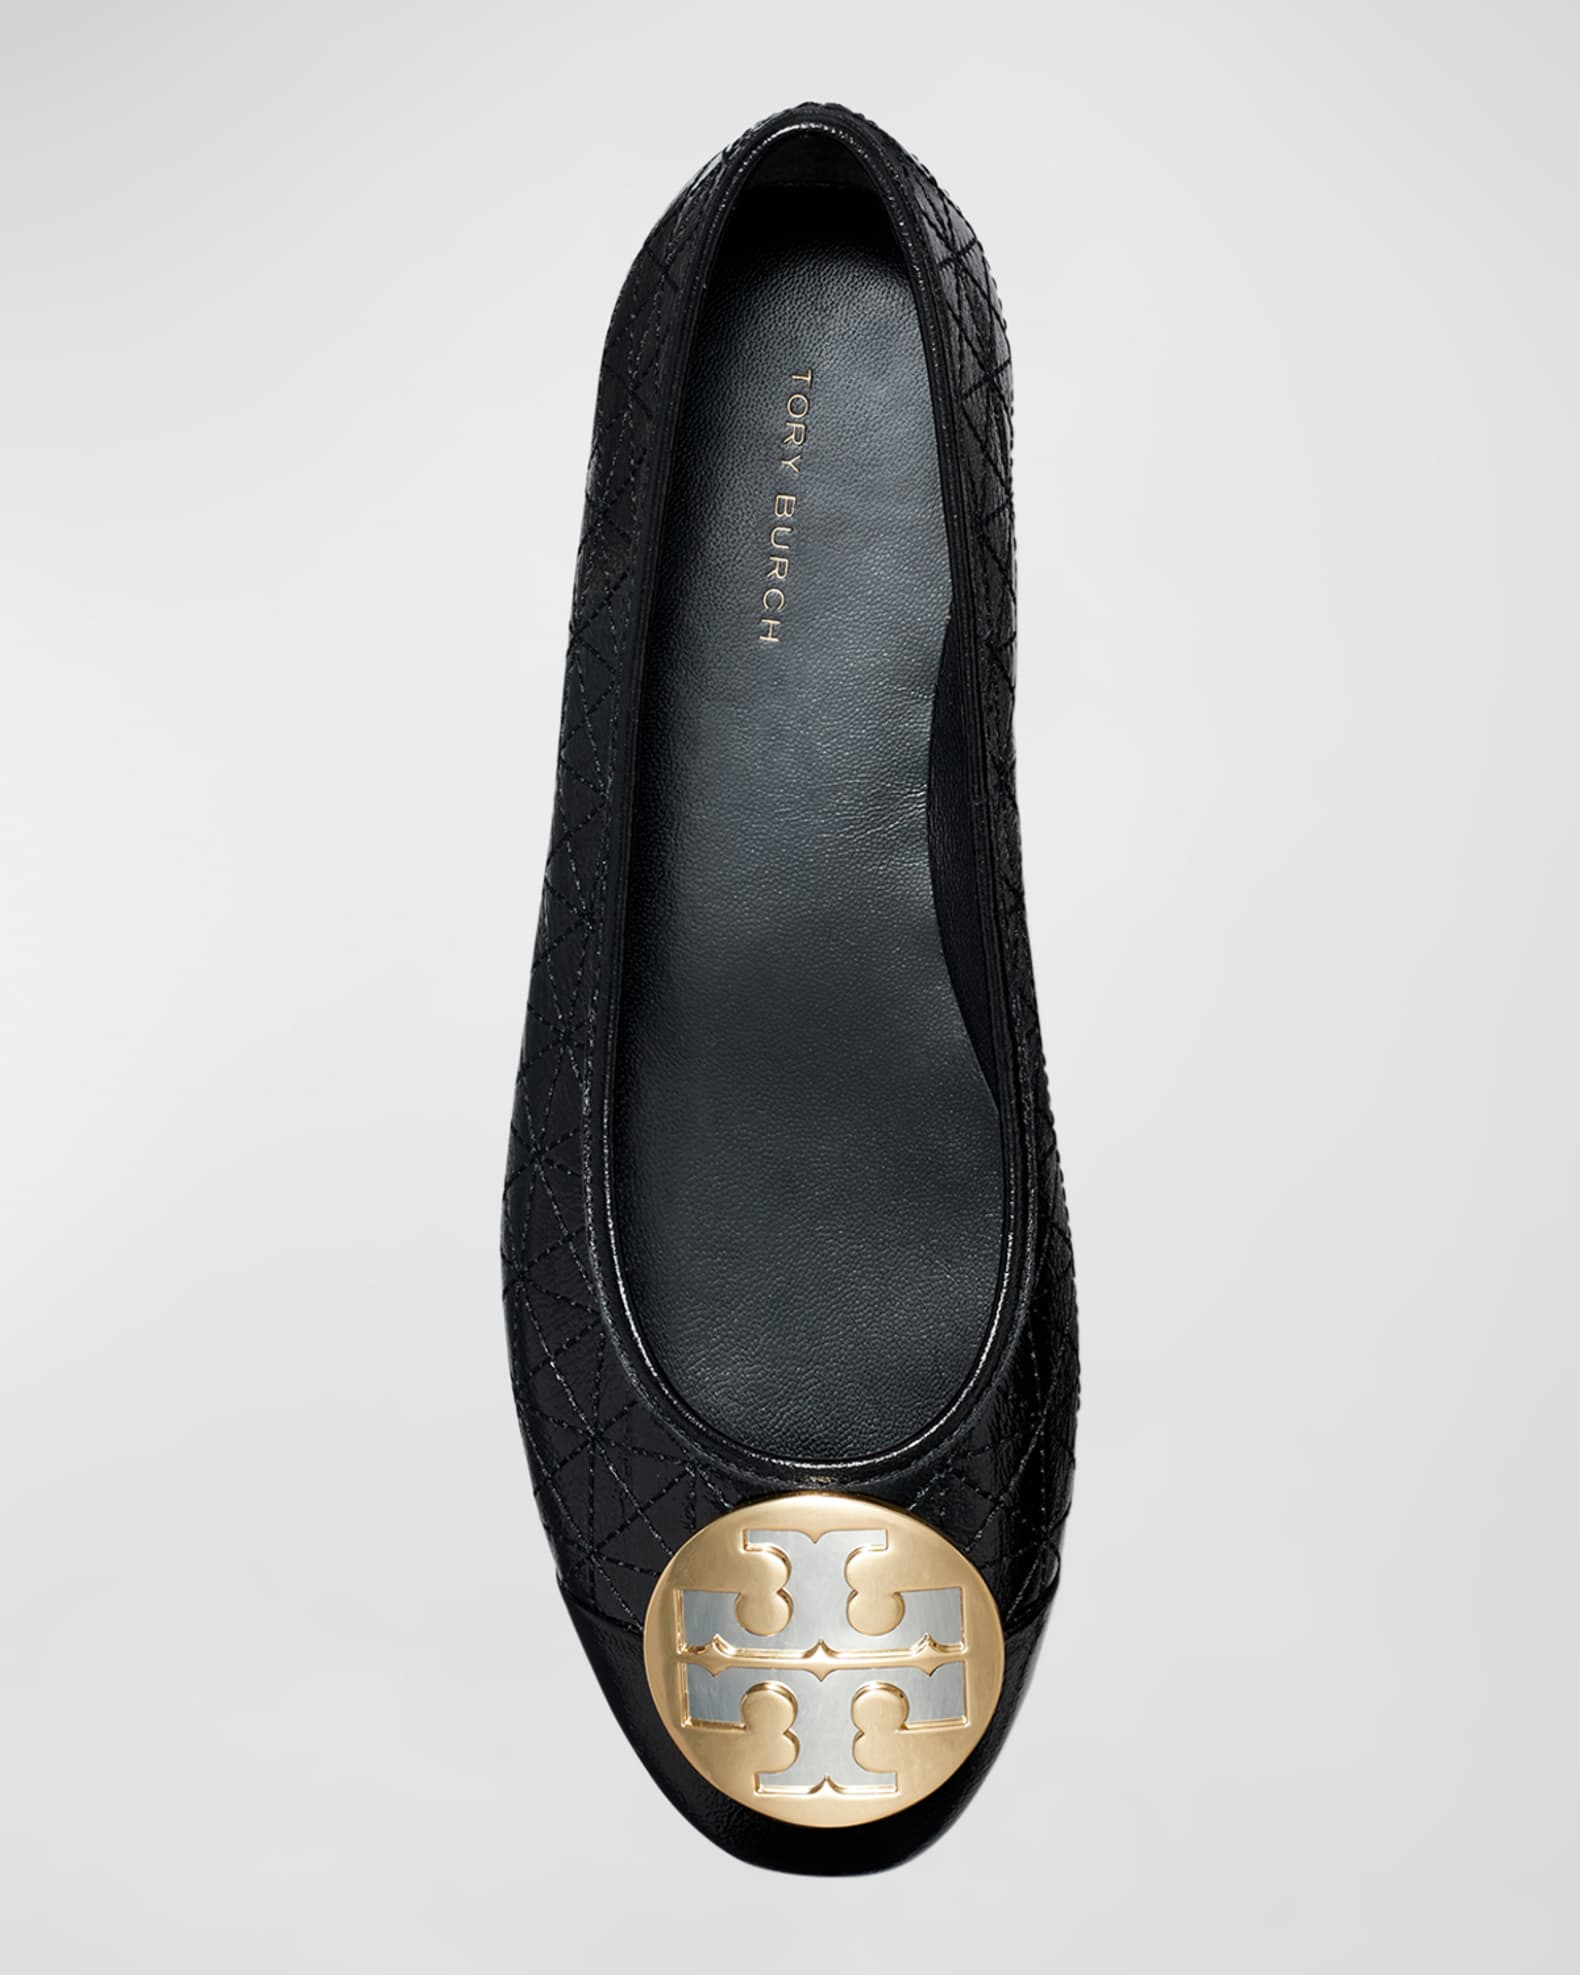 Tory Burch Claire Quilted Medallion Ballerina Flats | Neiman Marcus